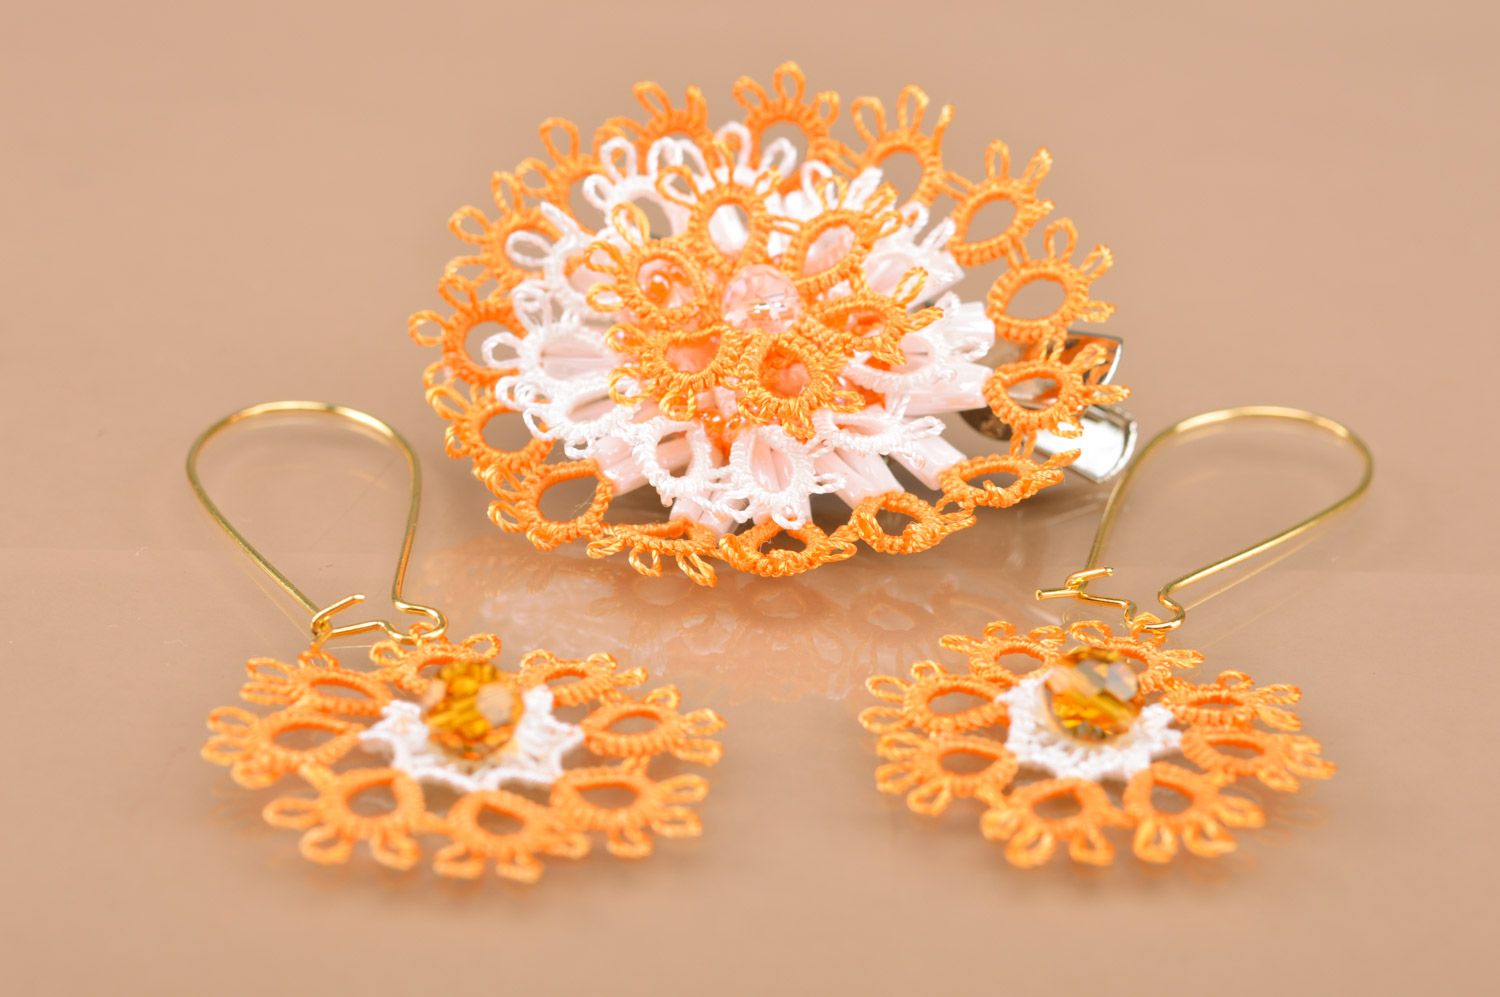 Handmade thread jewelry set woven using ankars tatting technique 2 items brooch-hair clip and earrings photo 4